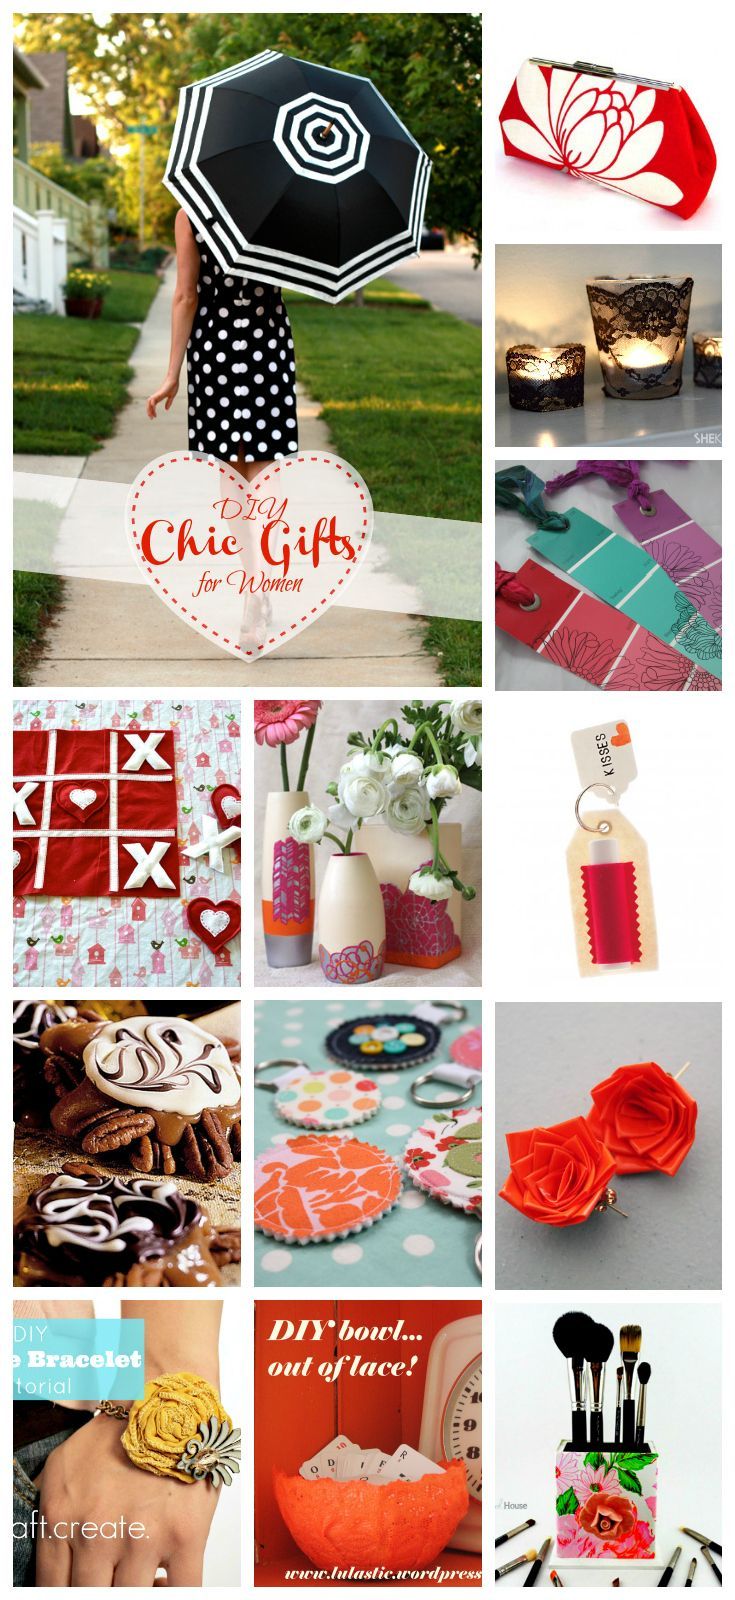 Top 30 DIY Gifts for women